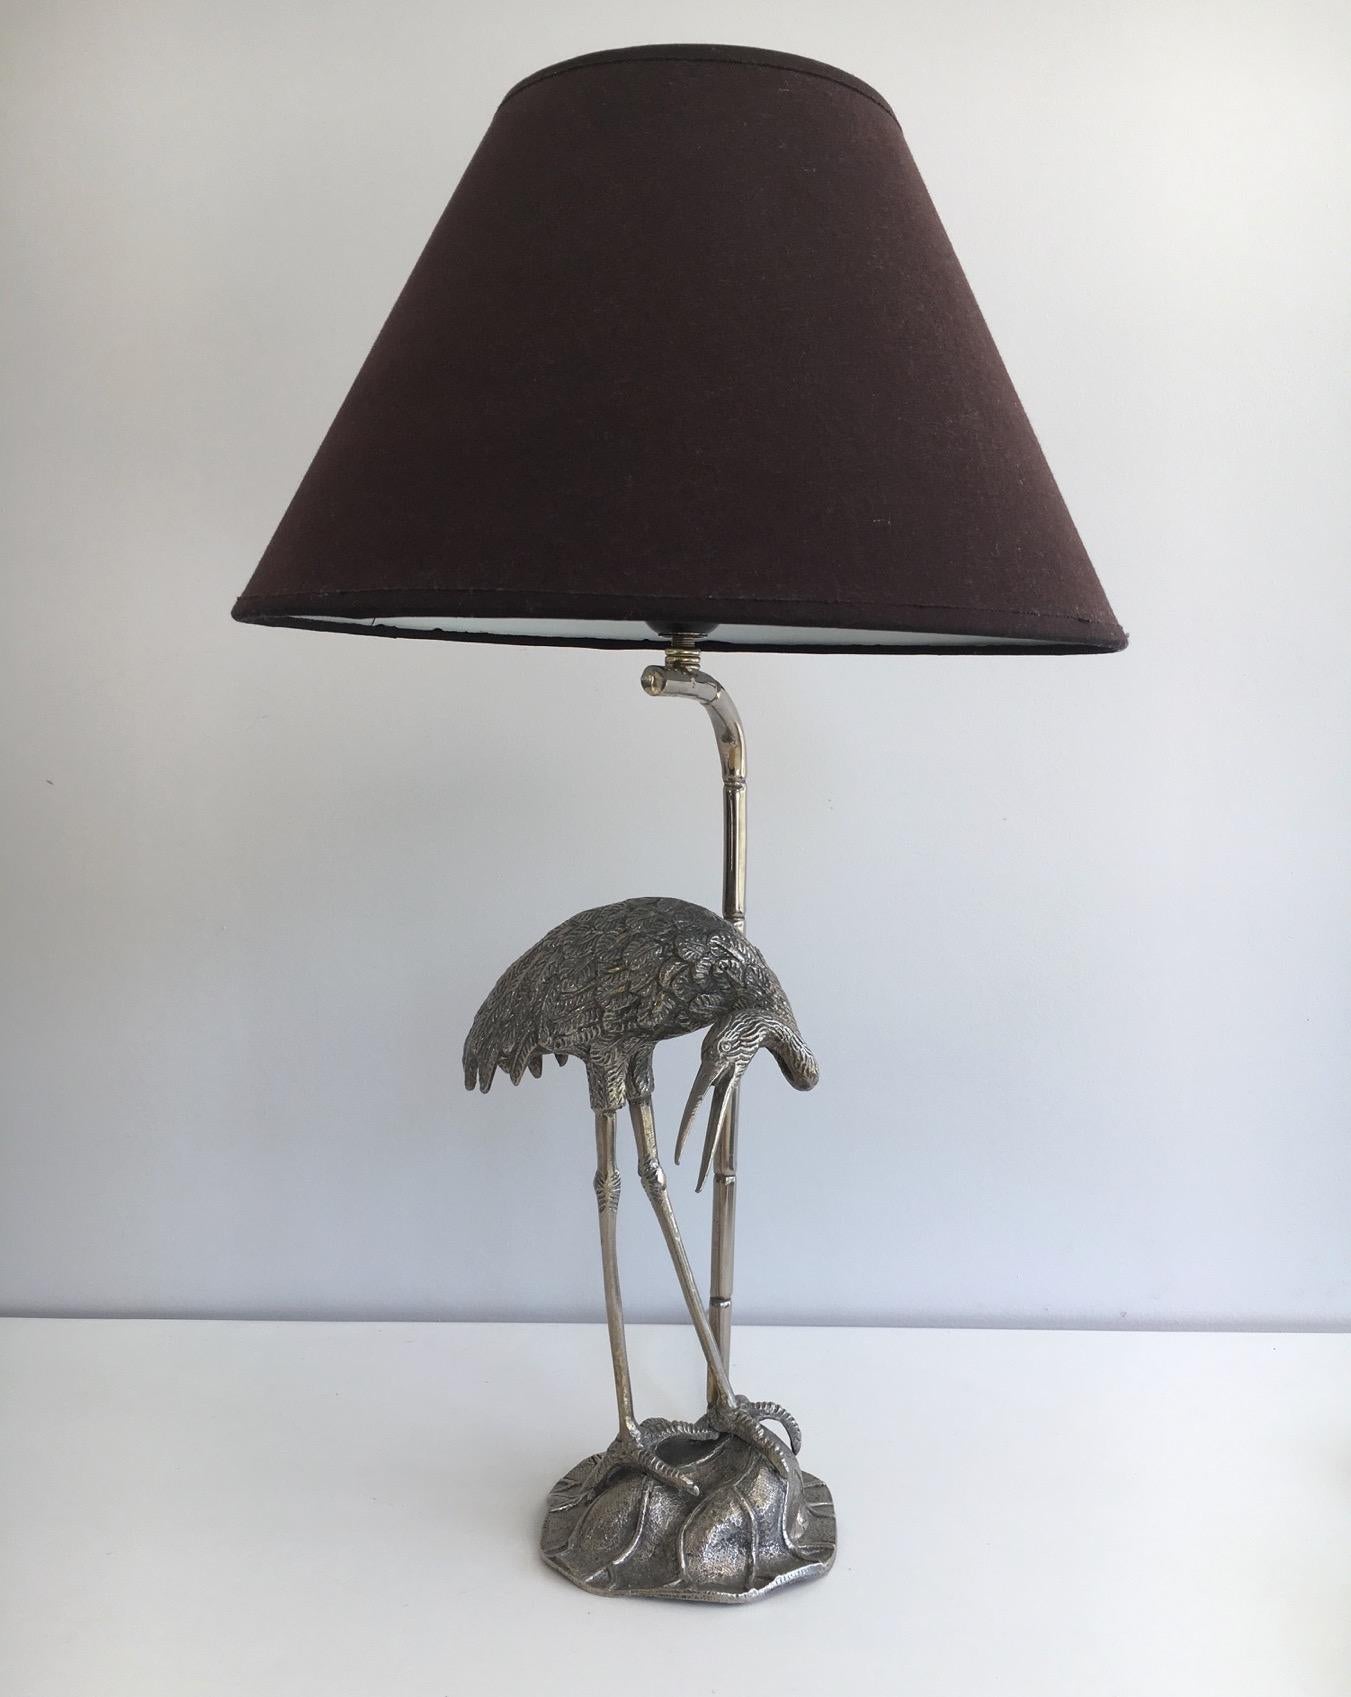 This unusual silvered lamp is showing a heron standing near a bamboo. It is very decorative. It is a French work, attributed to the famous French house Maison Bagués, circa 1960.